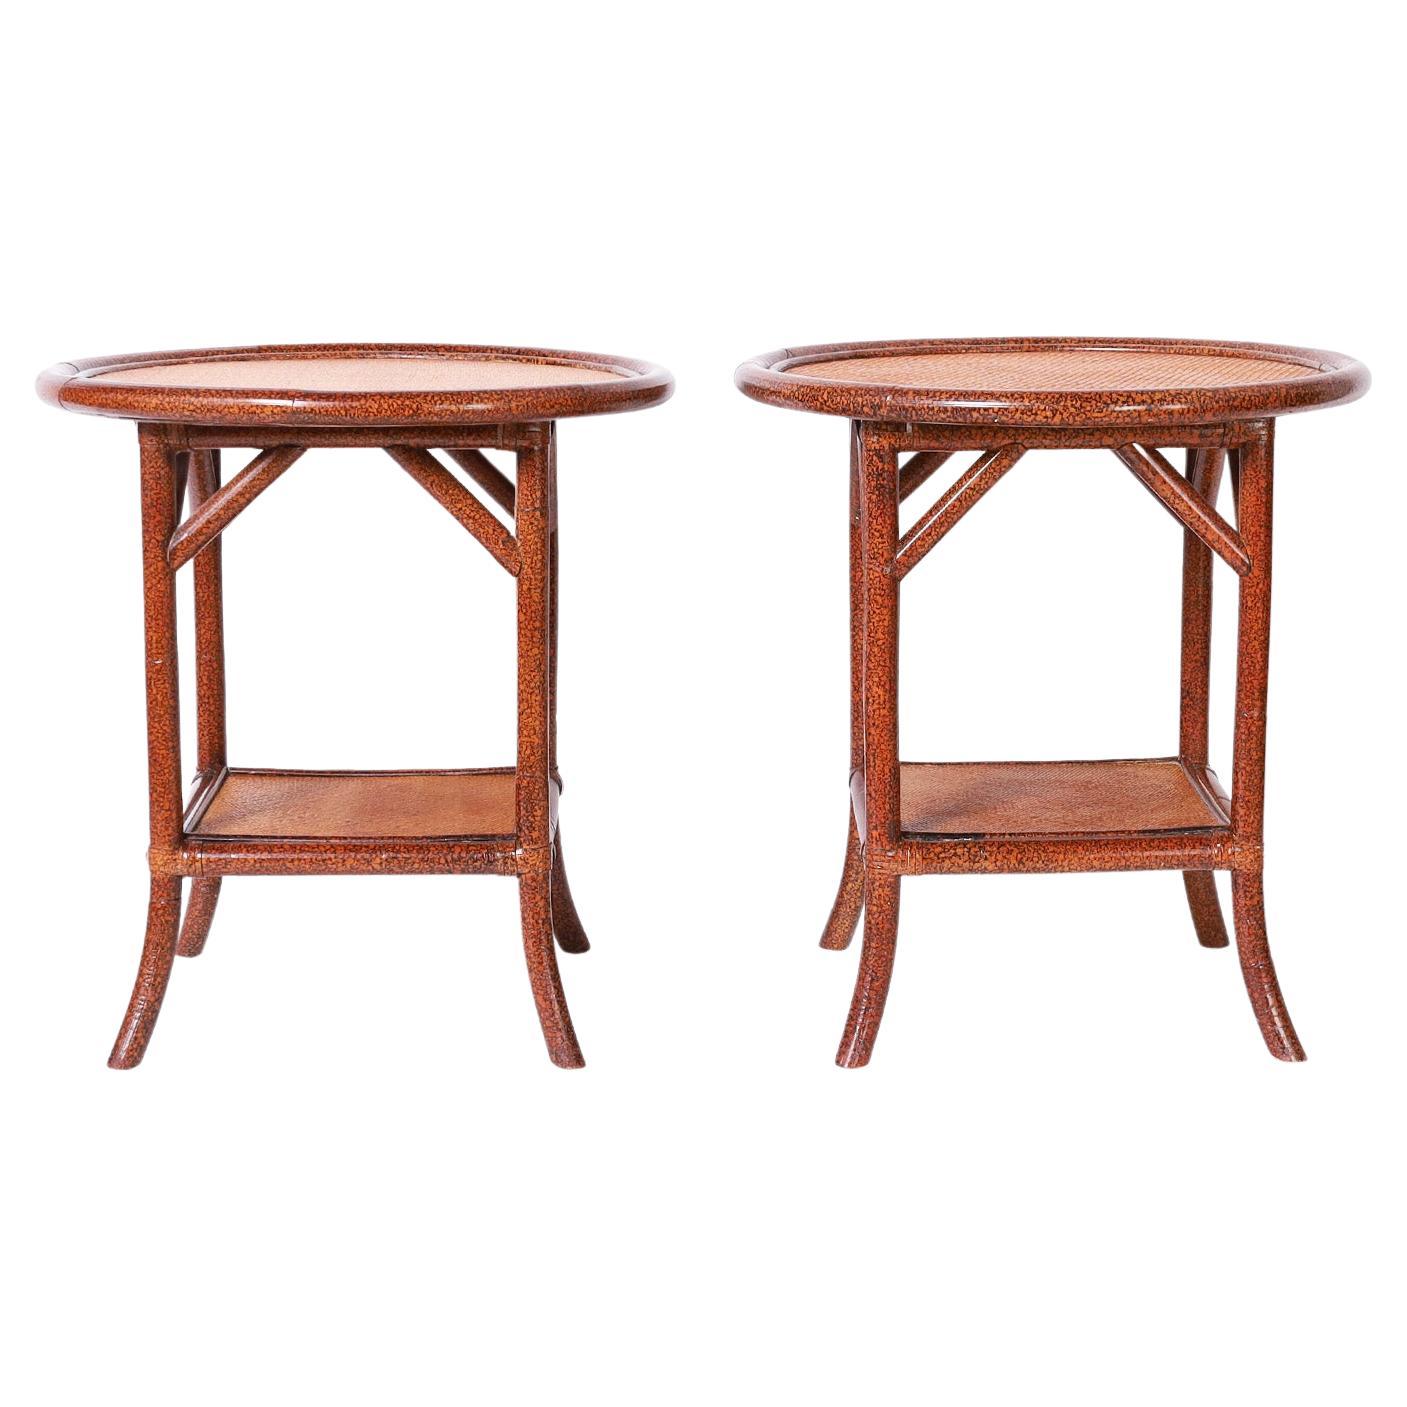 Pair of Mid-Century British Colonial Style Faux Bamboo and Grasscloth Stands